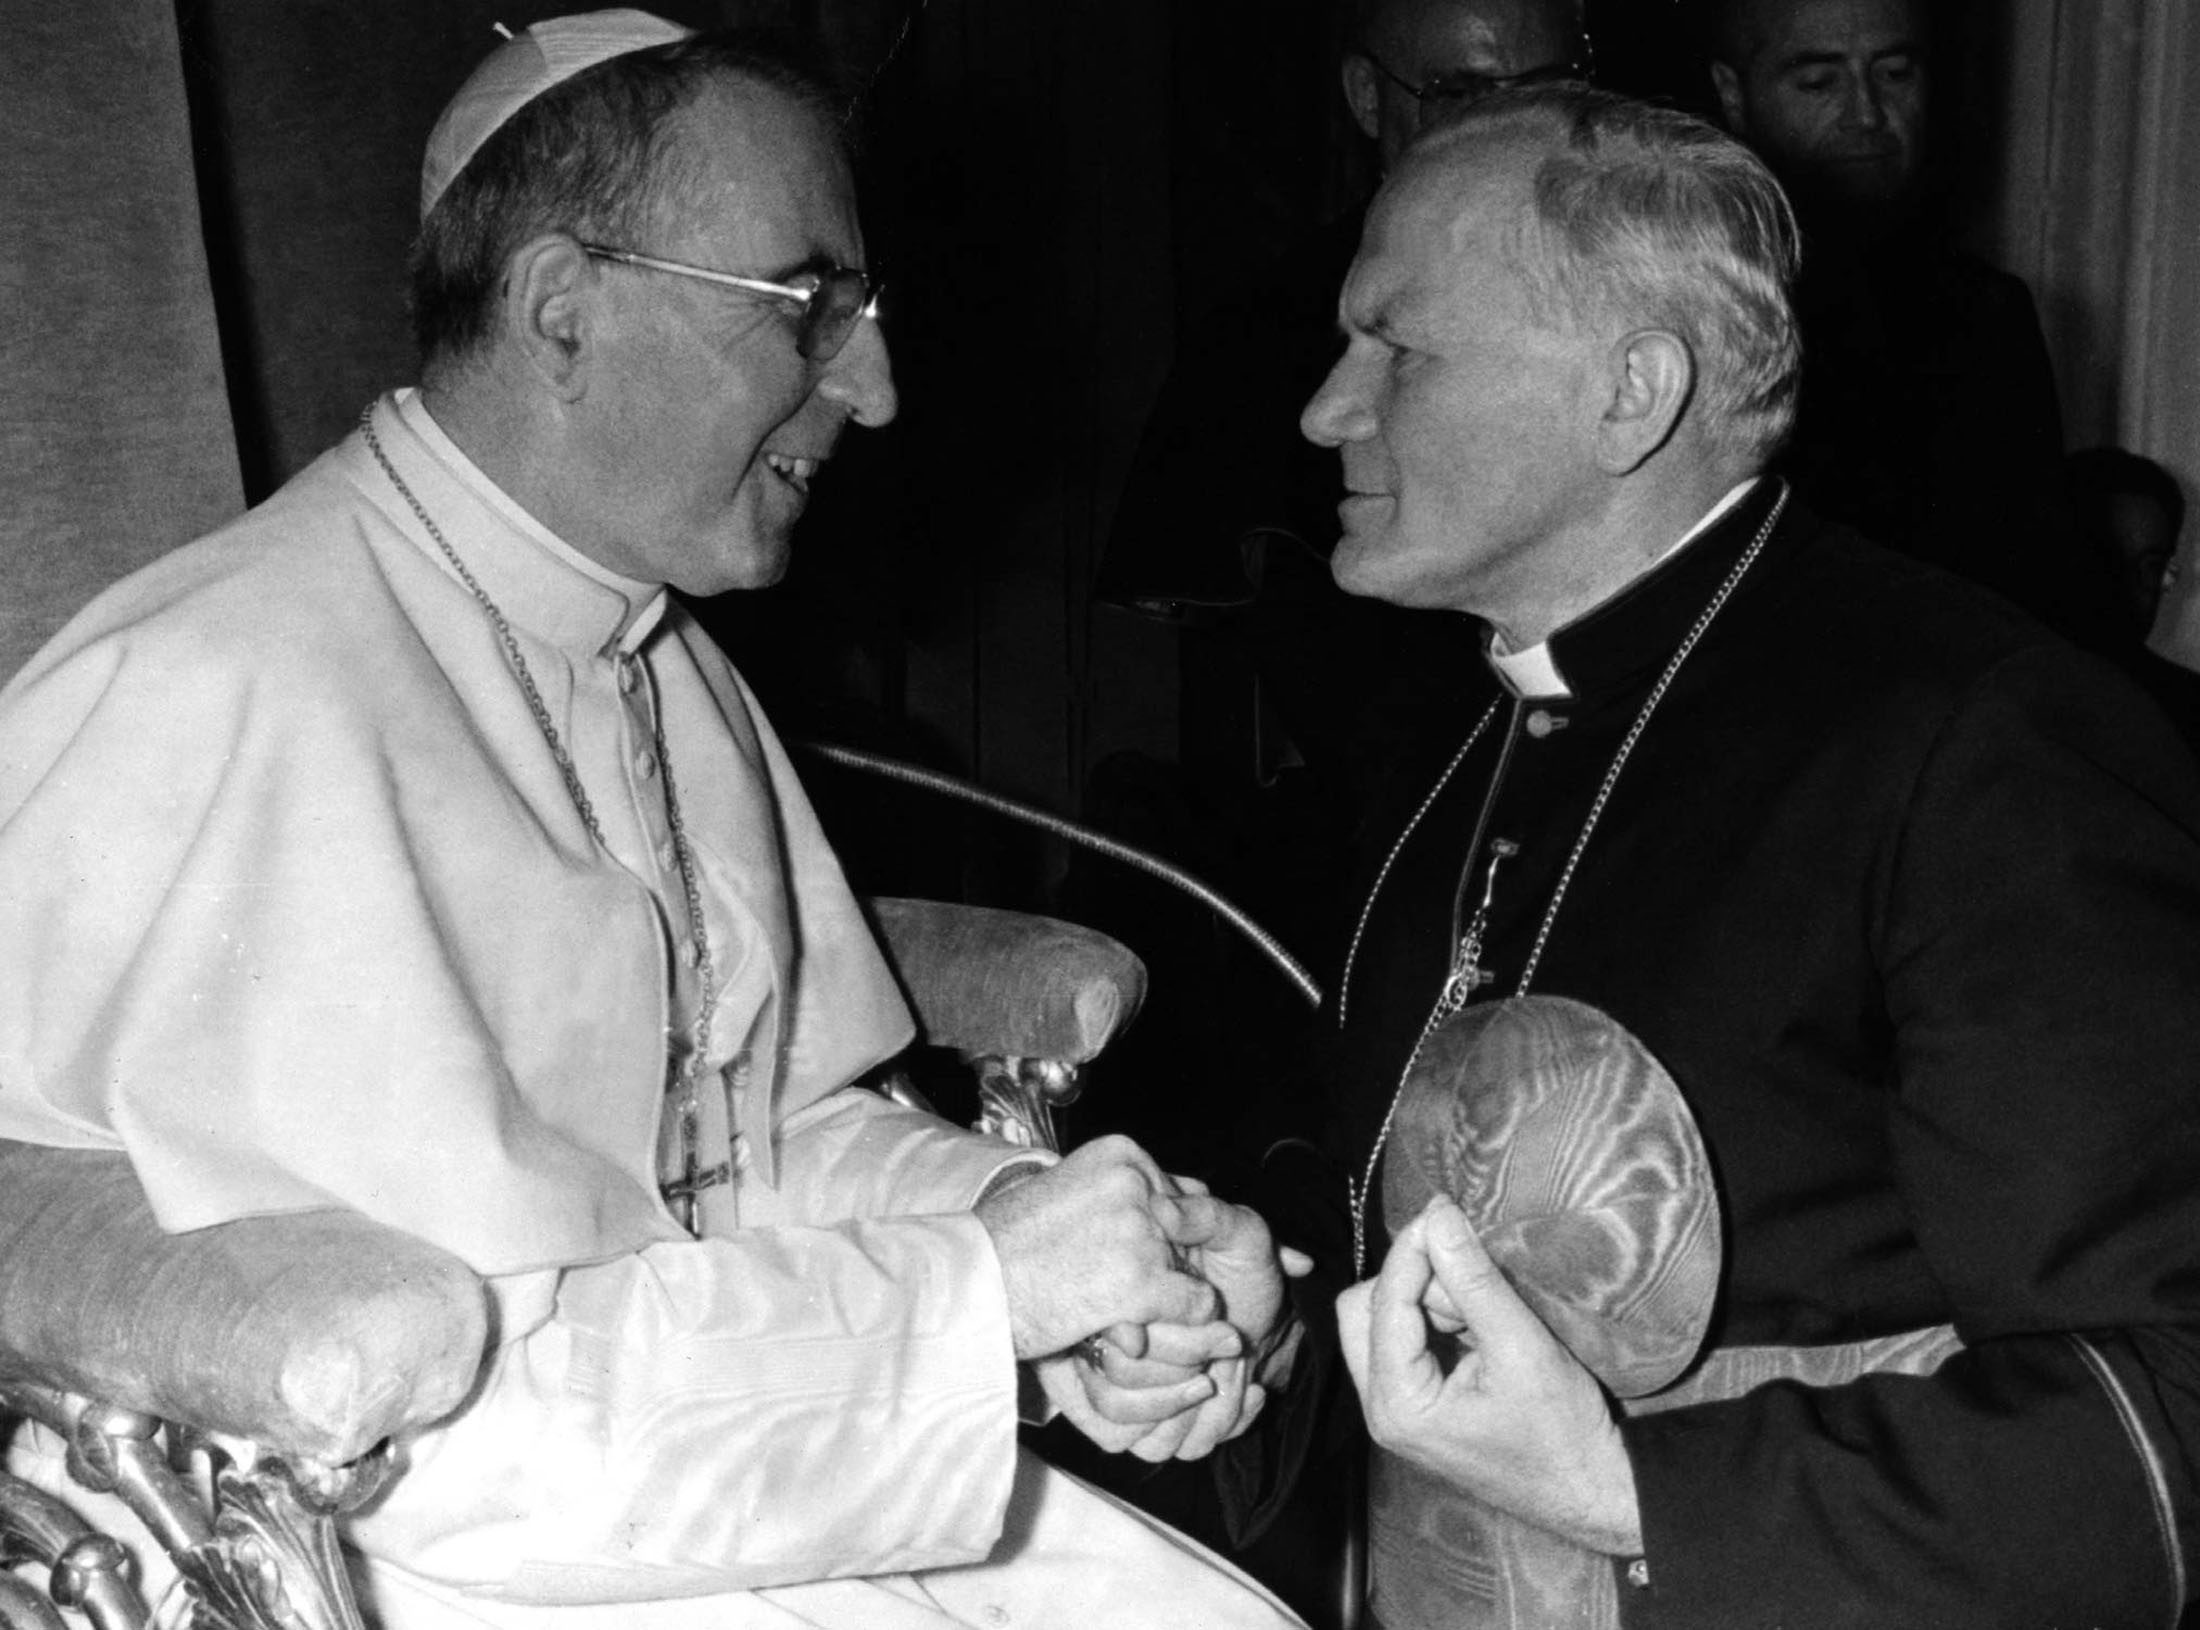 John Paul I, pope who reigned for only 33 days, put on path to sainthood